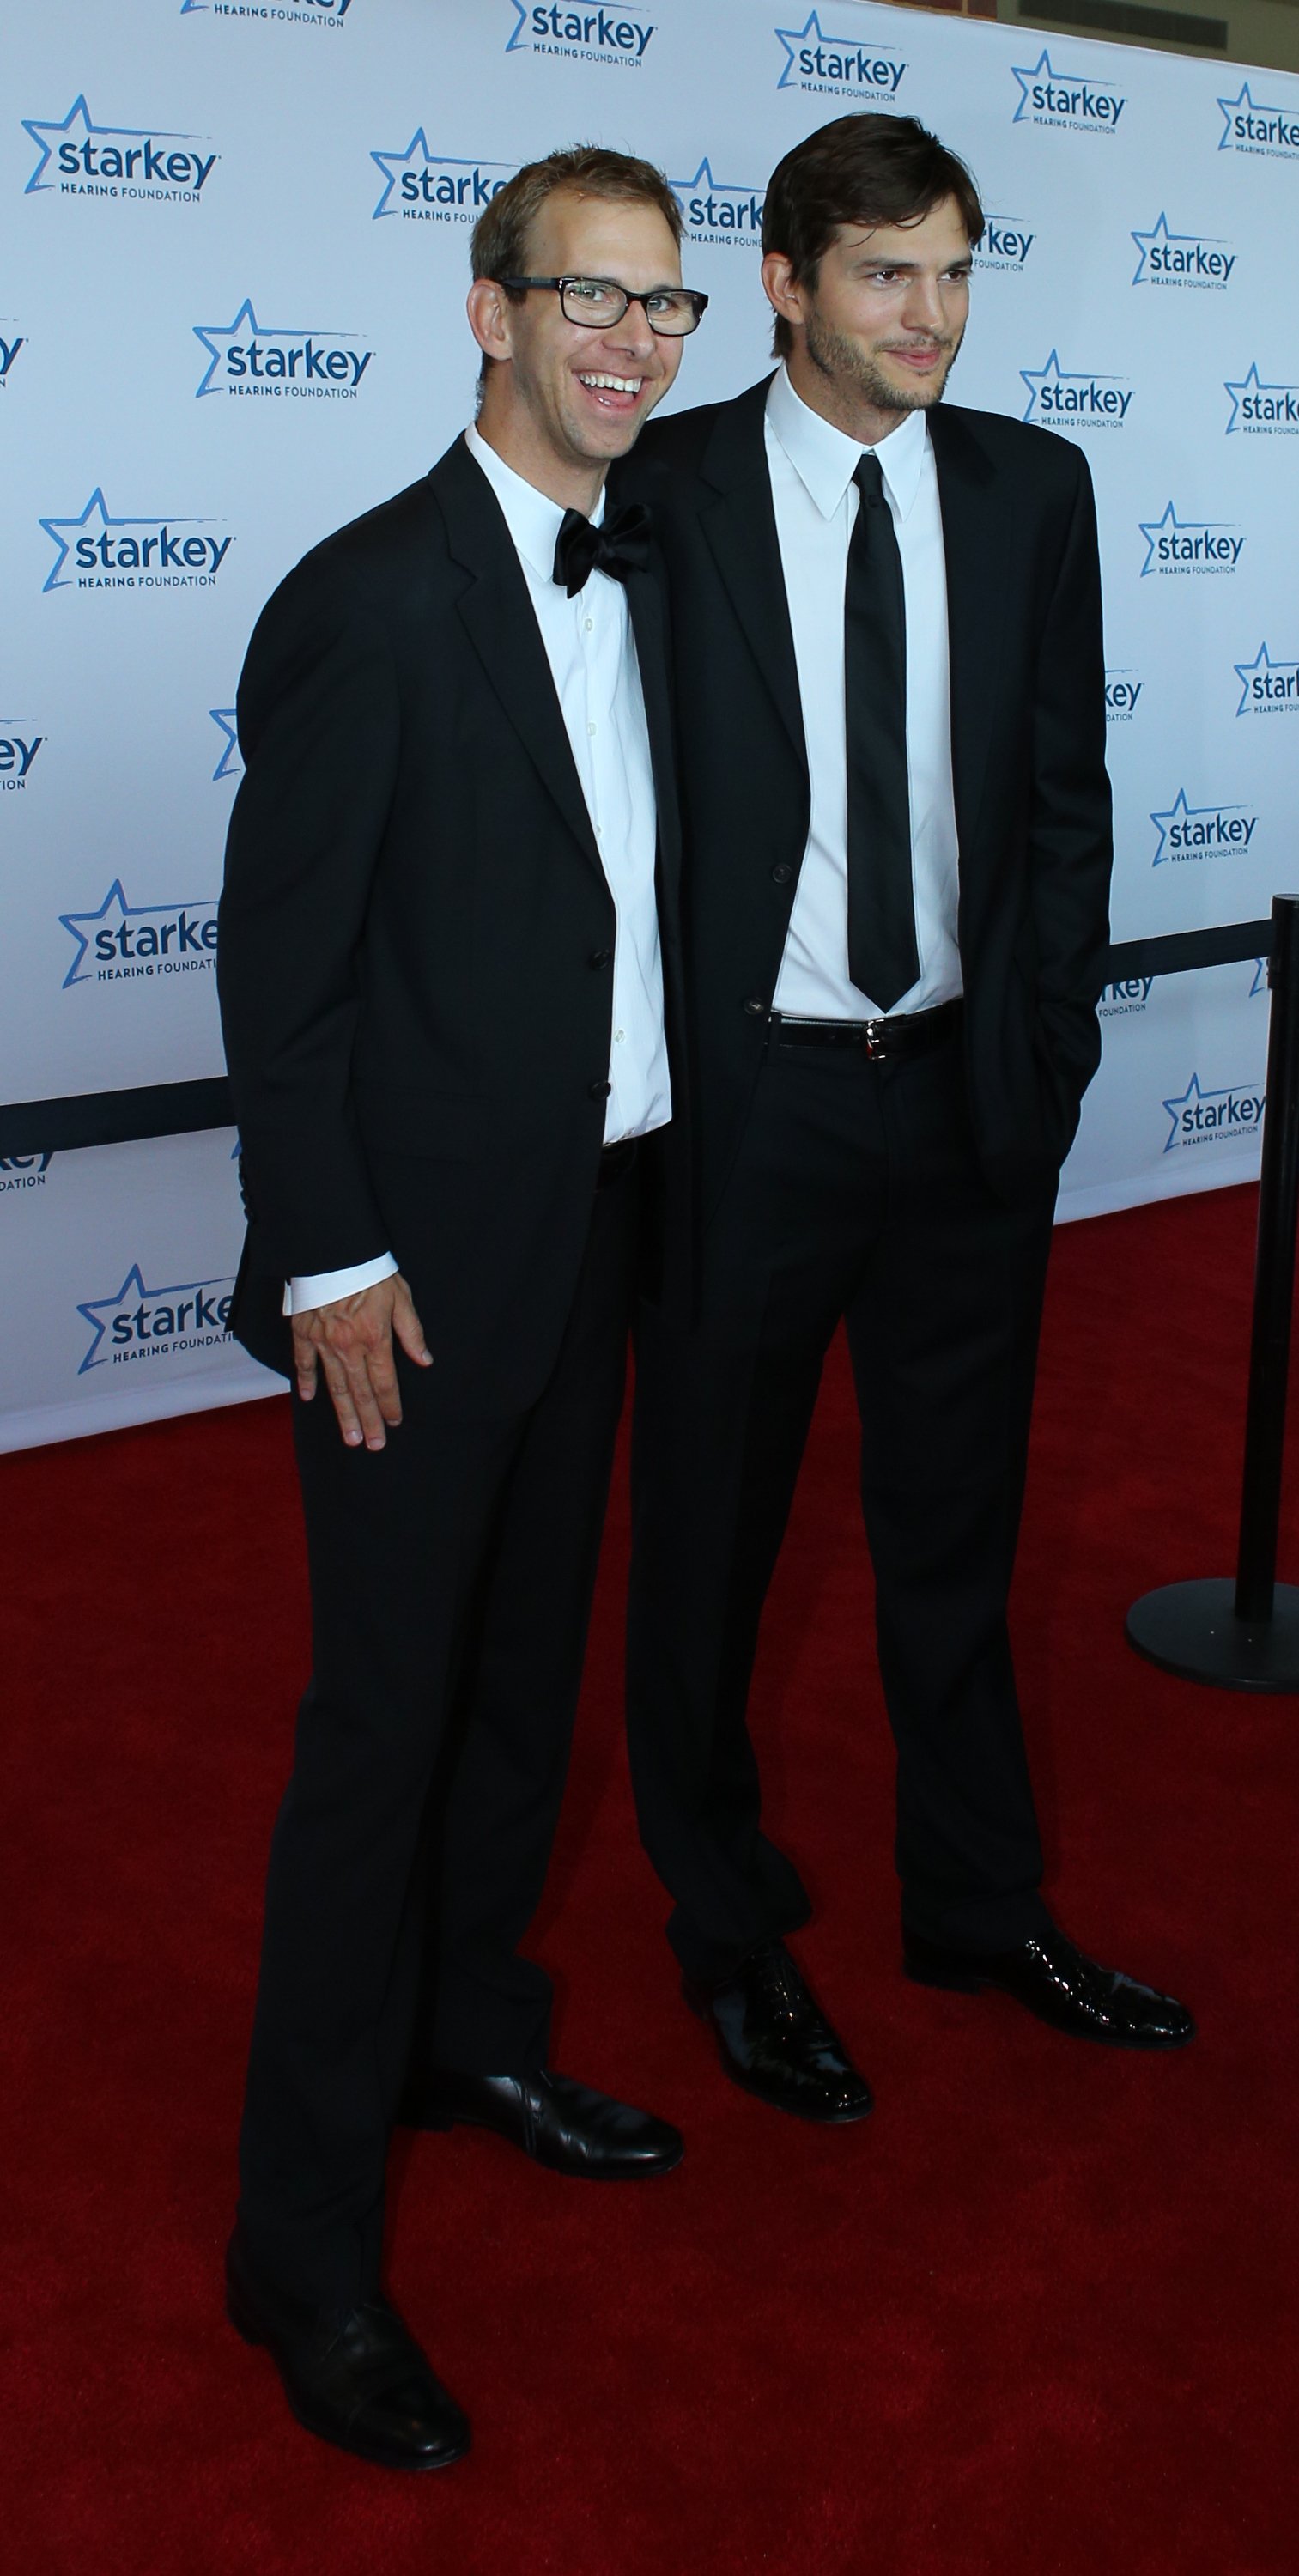 Michael Kutcher and brother Ashton Kutcher at the "So the World May Hear" Awards Gala on July 28, 2013 in St. Paul, Minnesota | Source: Getty Images